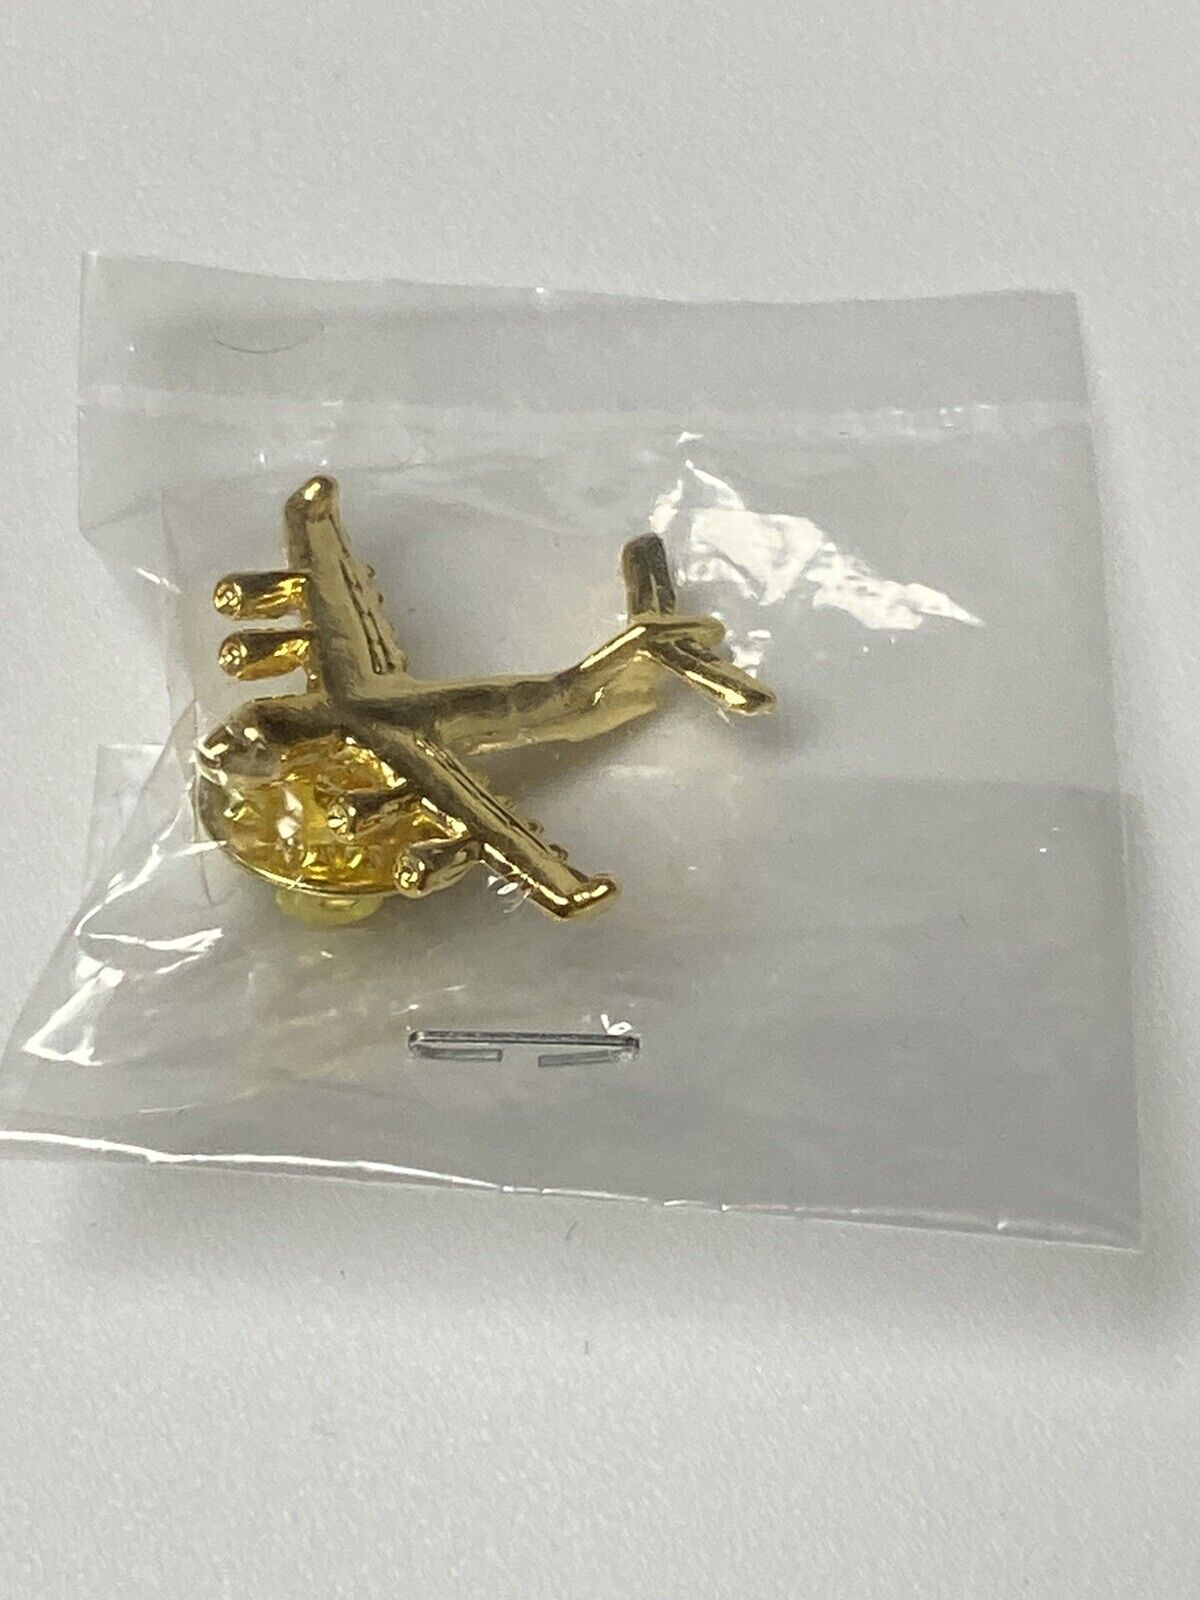 Boeing C-17 Globemaster III Cargo Aircraft Lapel Vest or Hat Pin Gold Tone - NEW